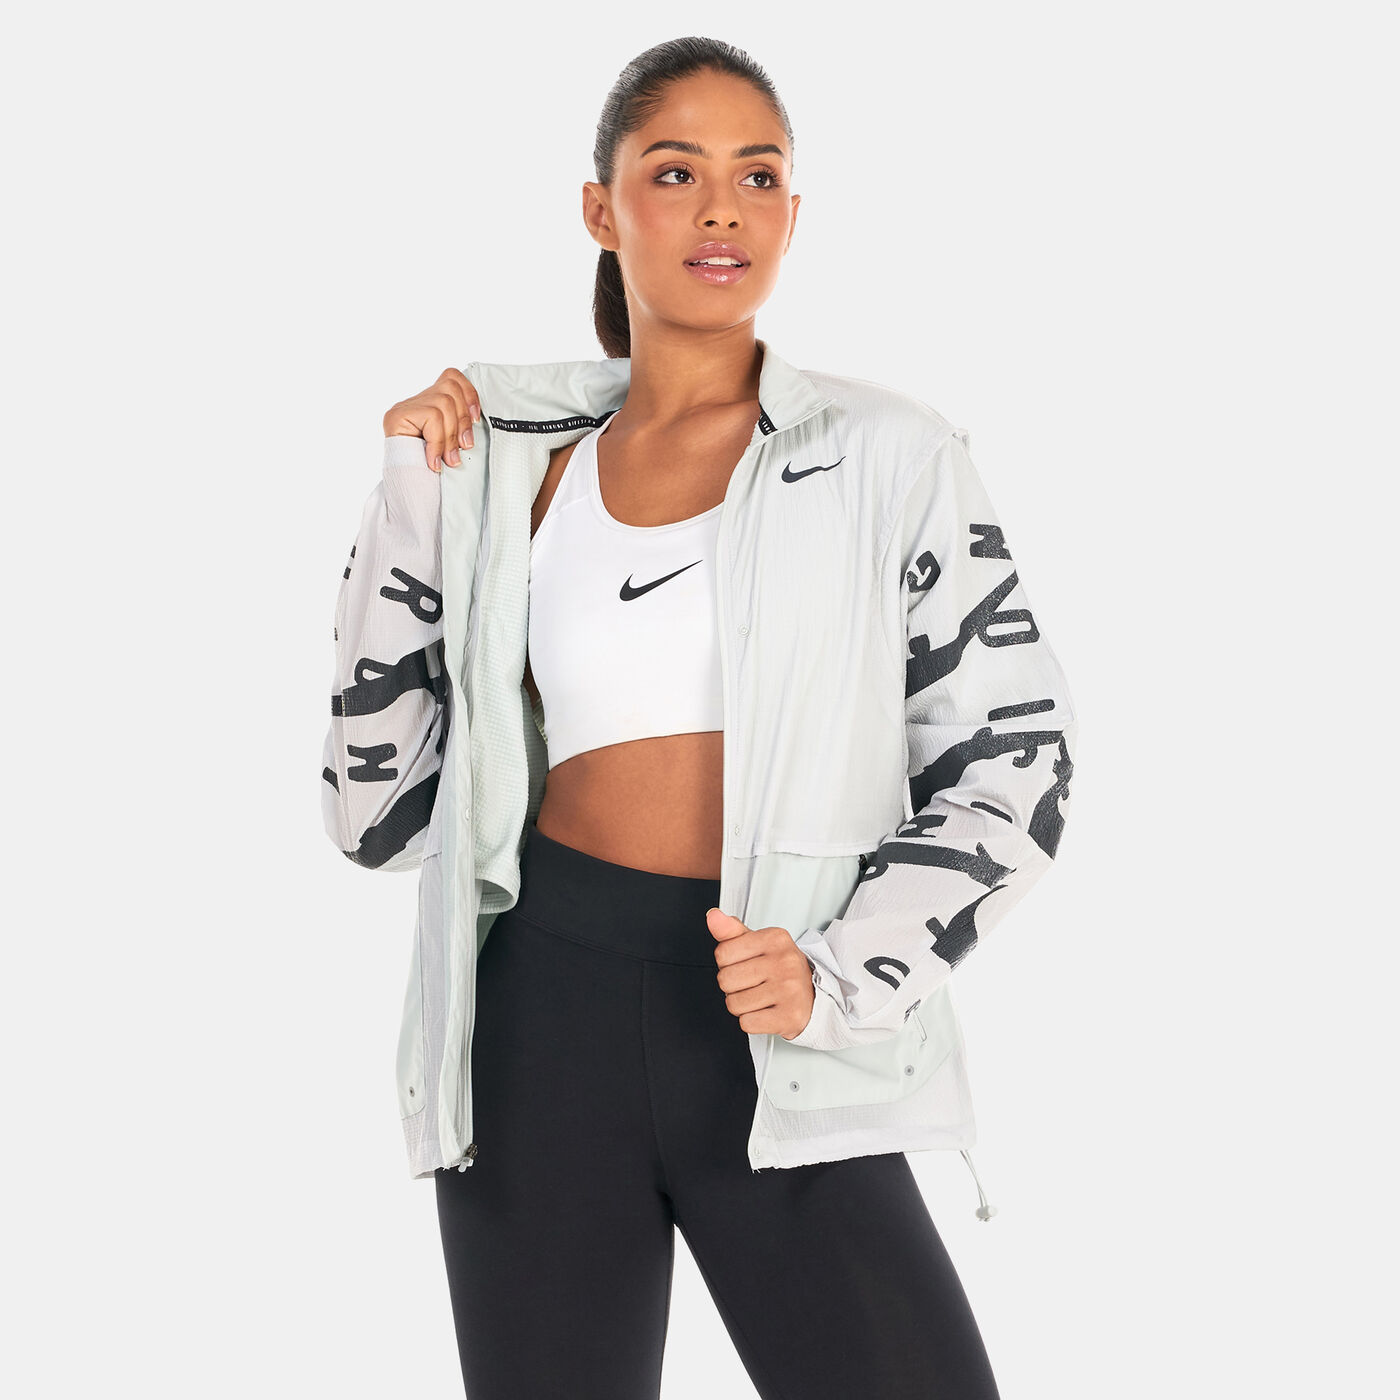 Women's Therma-FIT Run Division Jacket